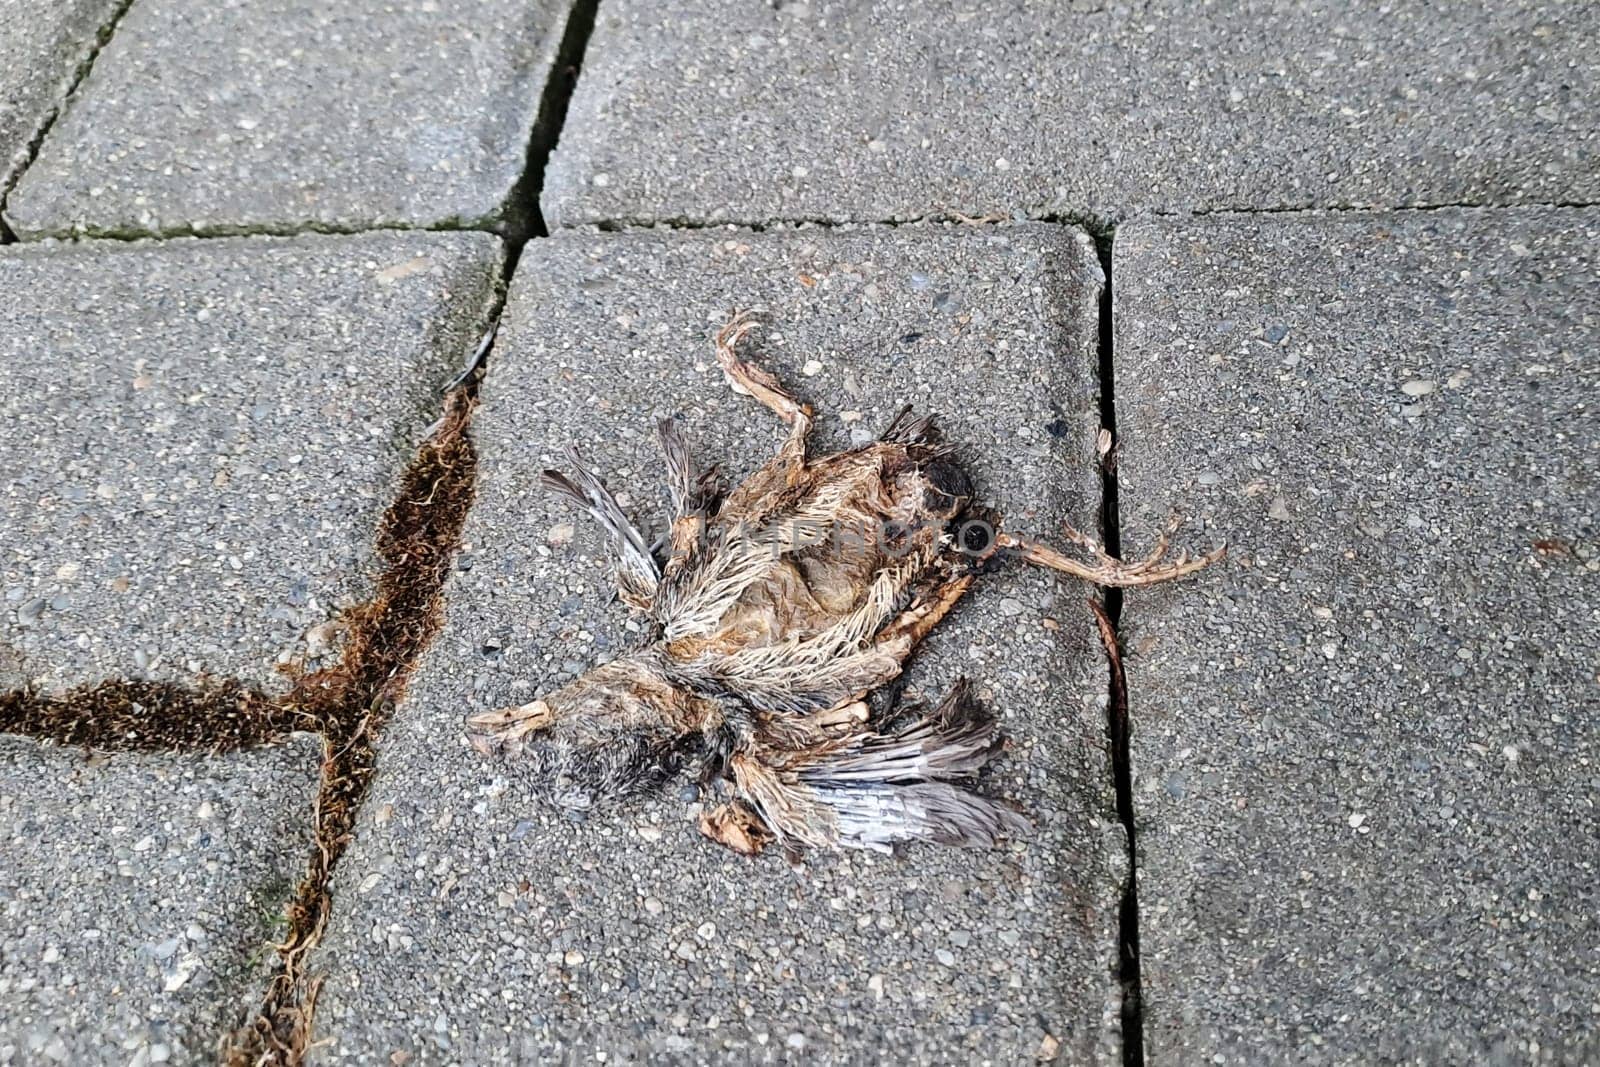 Baby bird that will never fly. Very young chick, fallen from nest. Dead on a pavement.